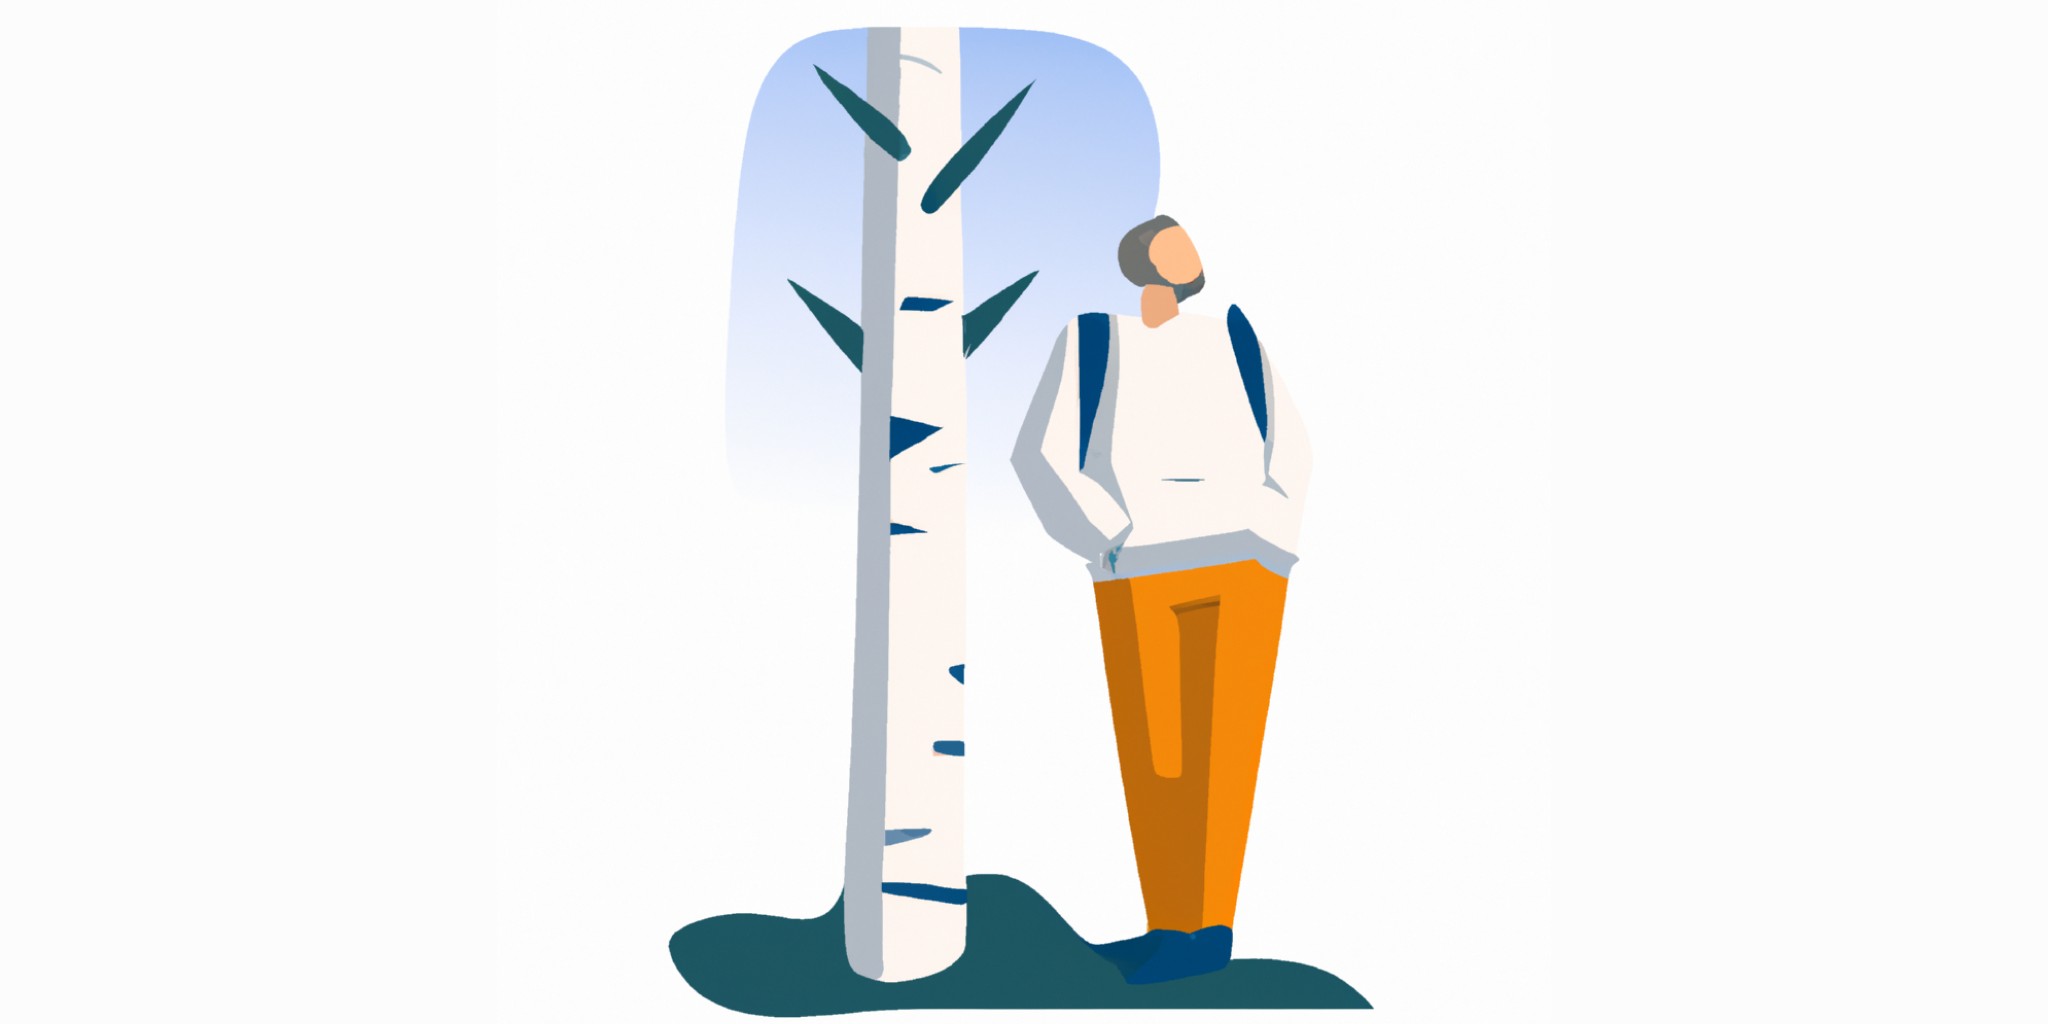 birch tree with person next to it in flat illustration style with gradients and white background